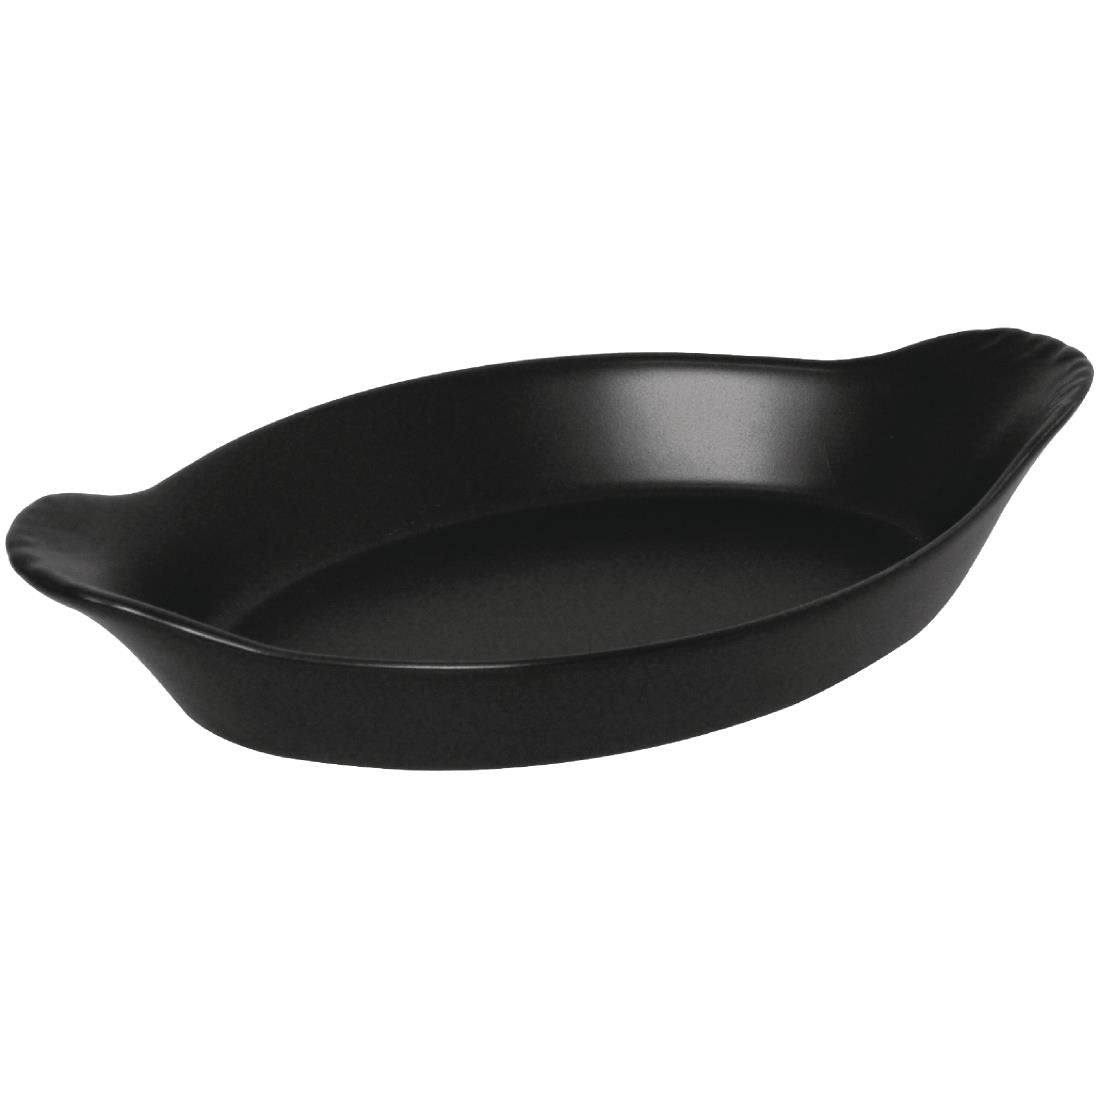 DK834 Olympia Mediterranean Oval Eared Dishes 204 x 118mm (Pack of 6) JD Catering Equipment Solutions Ltd